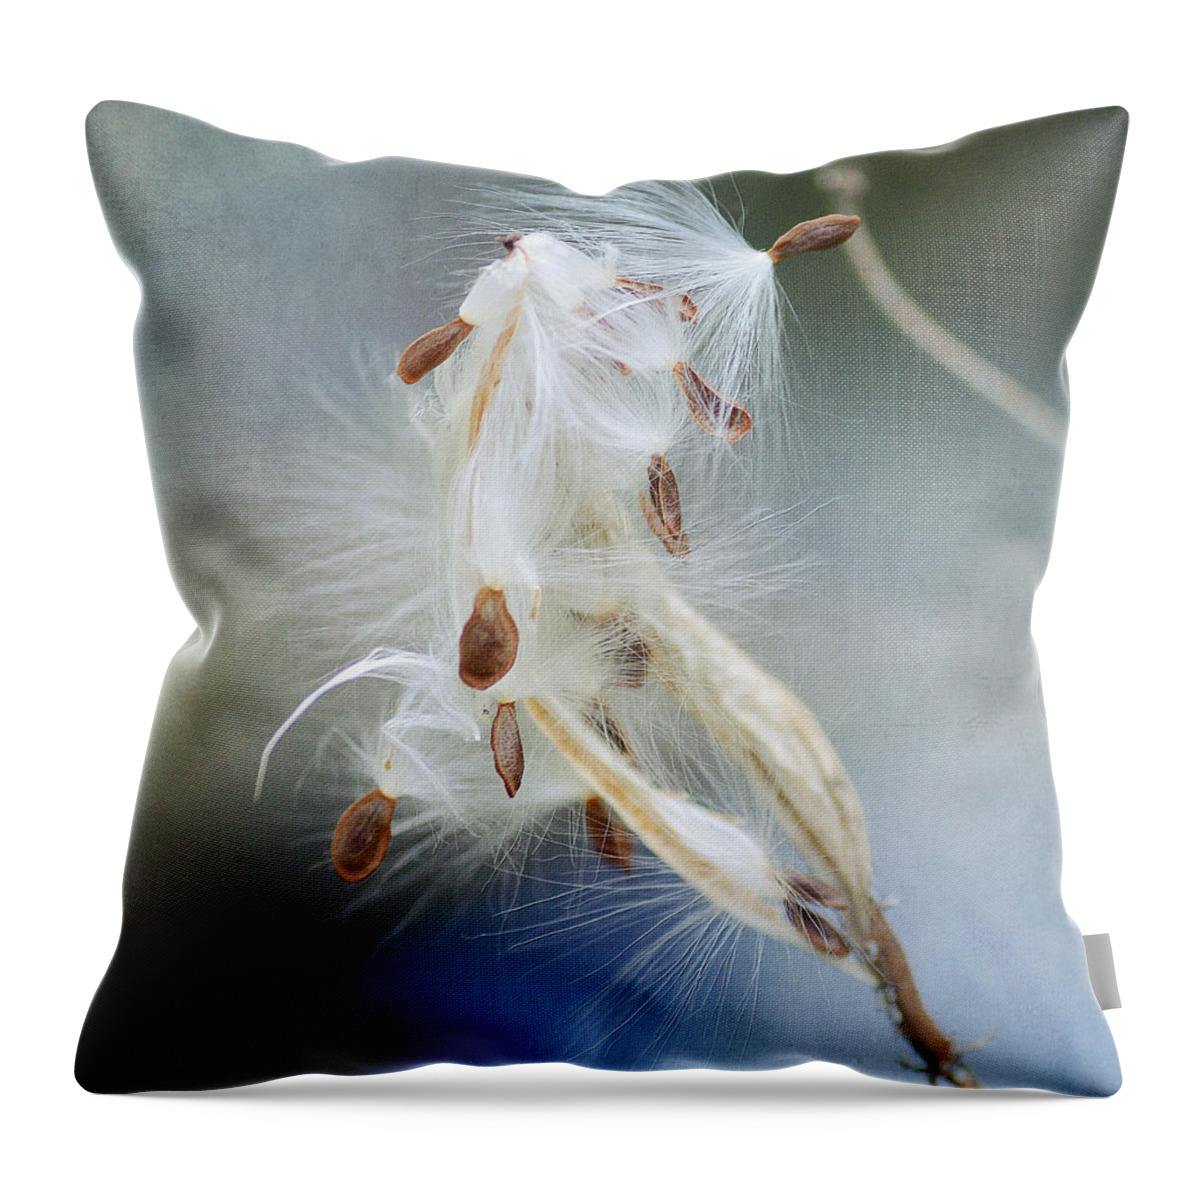 Milkweed Pod Throw Pillow featuring the photograph Ethereal Pod 4 by Fraida Gutovich